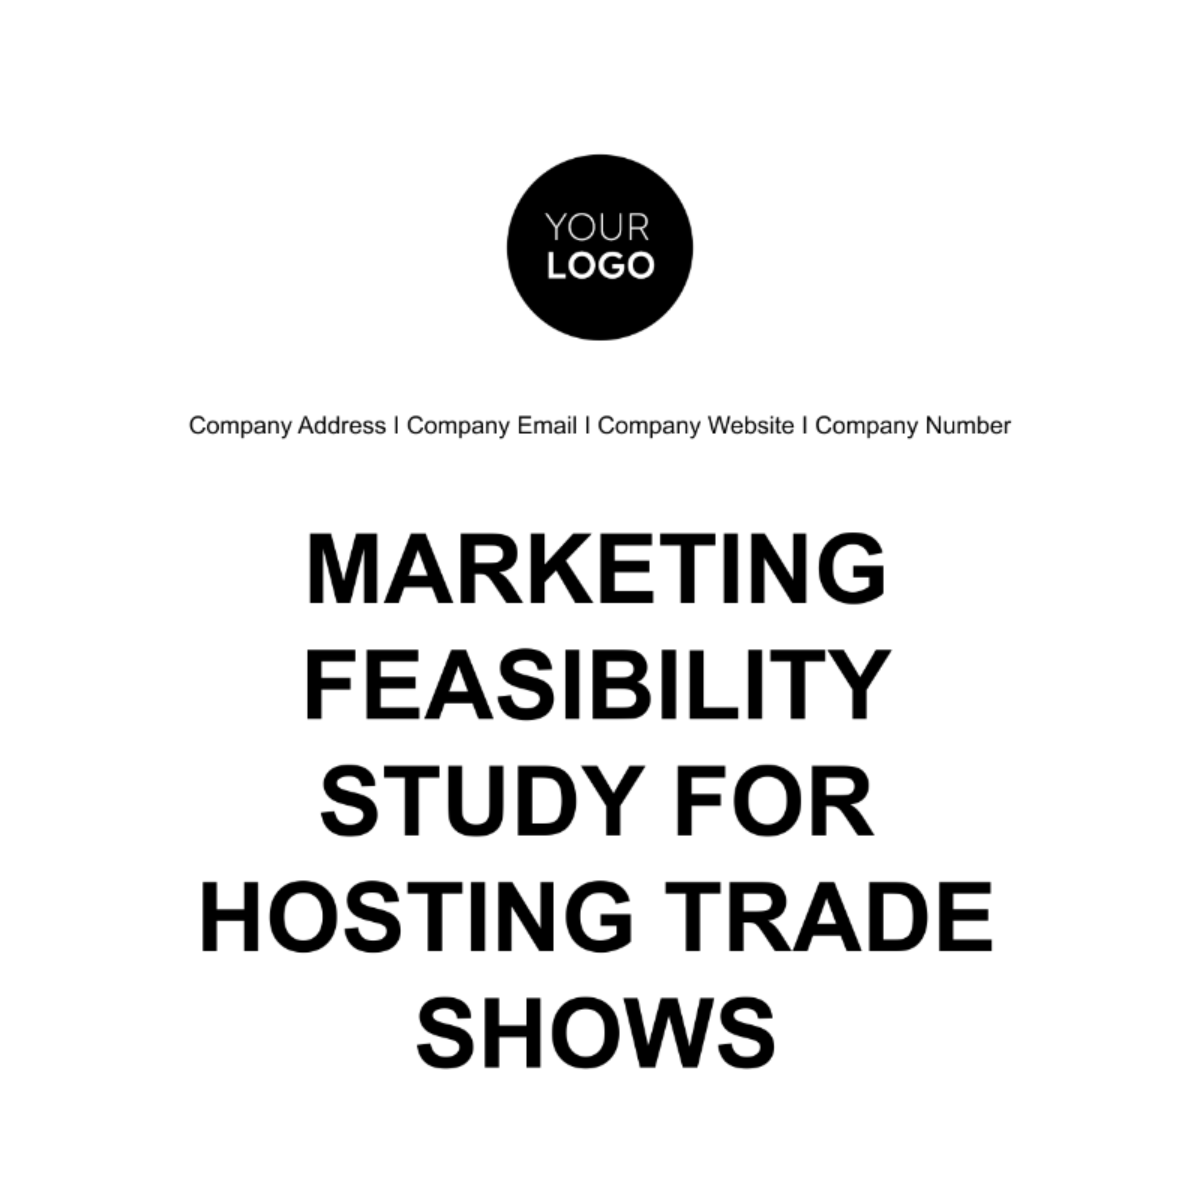 Marketing Feasibility Study for Hosting Trade Shows Template